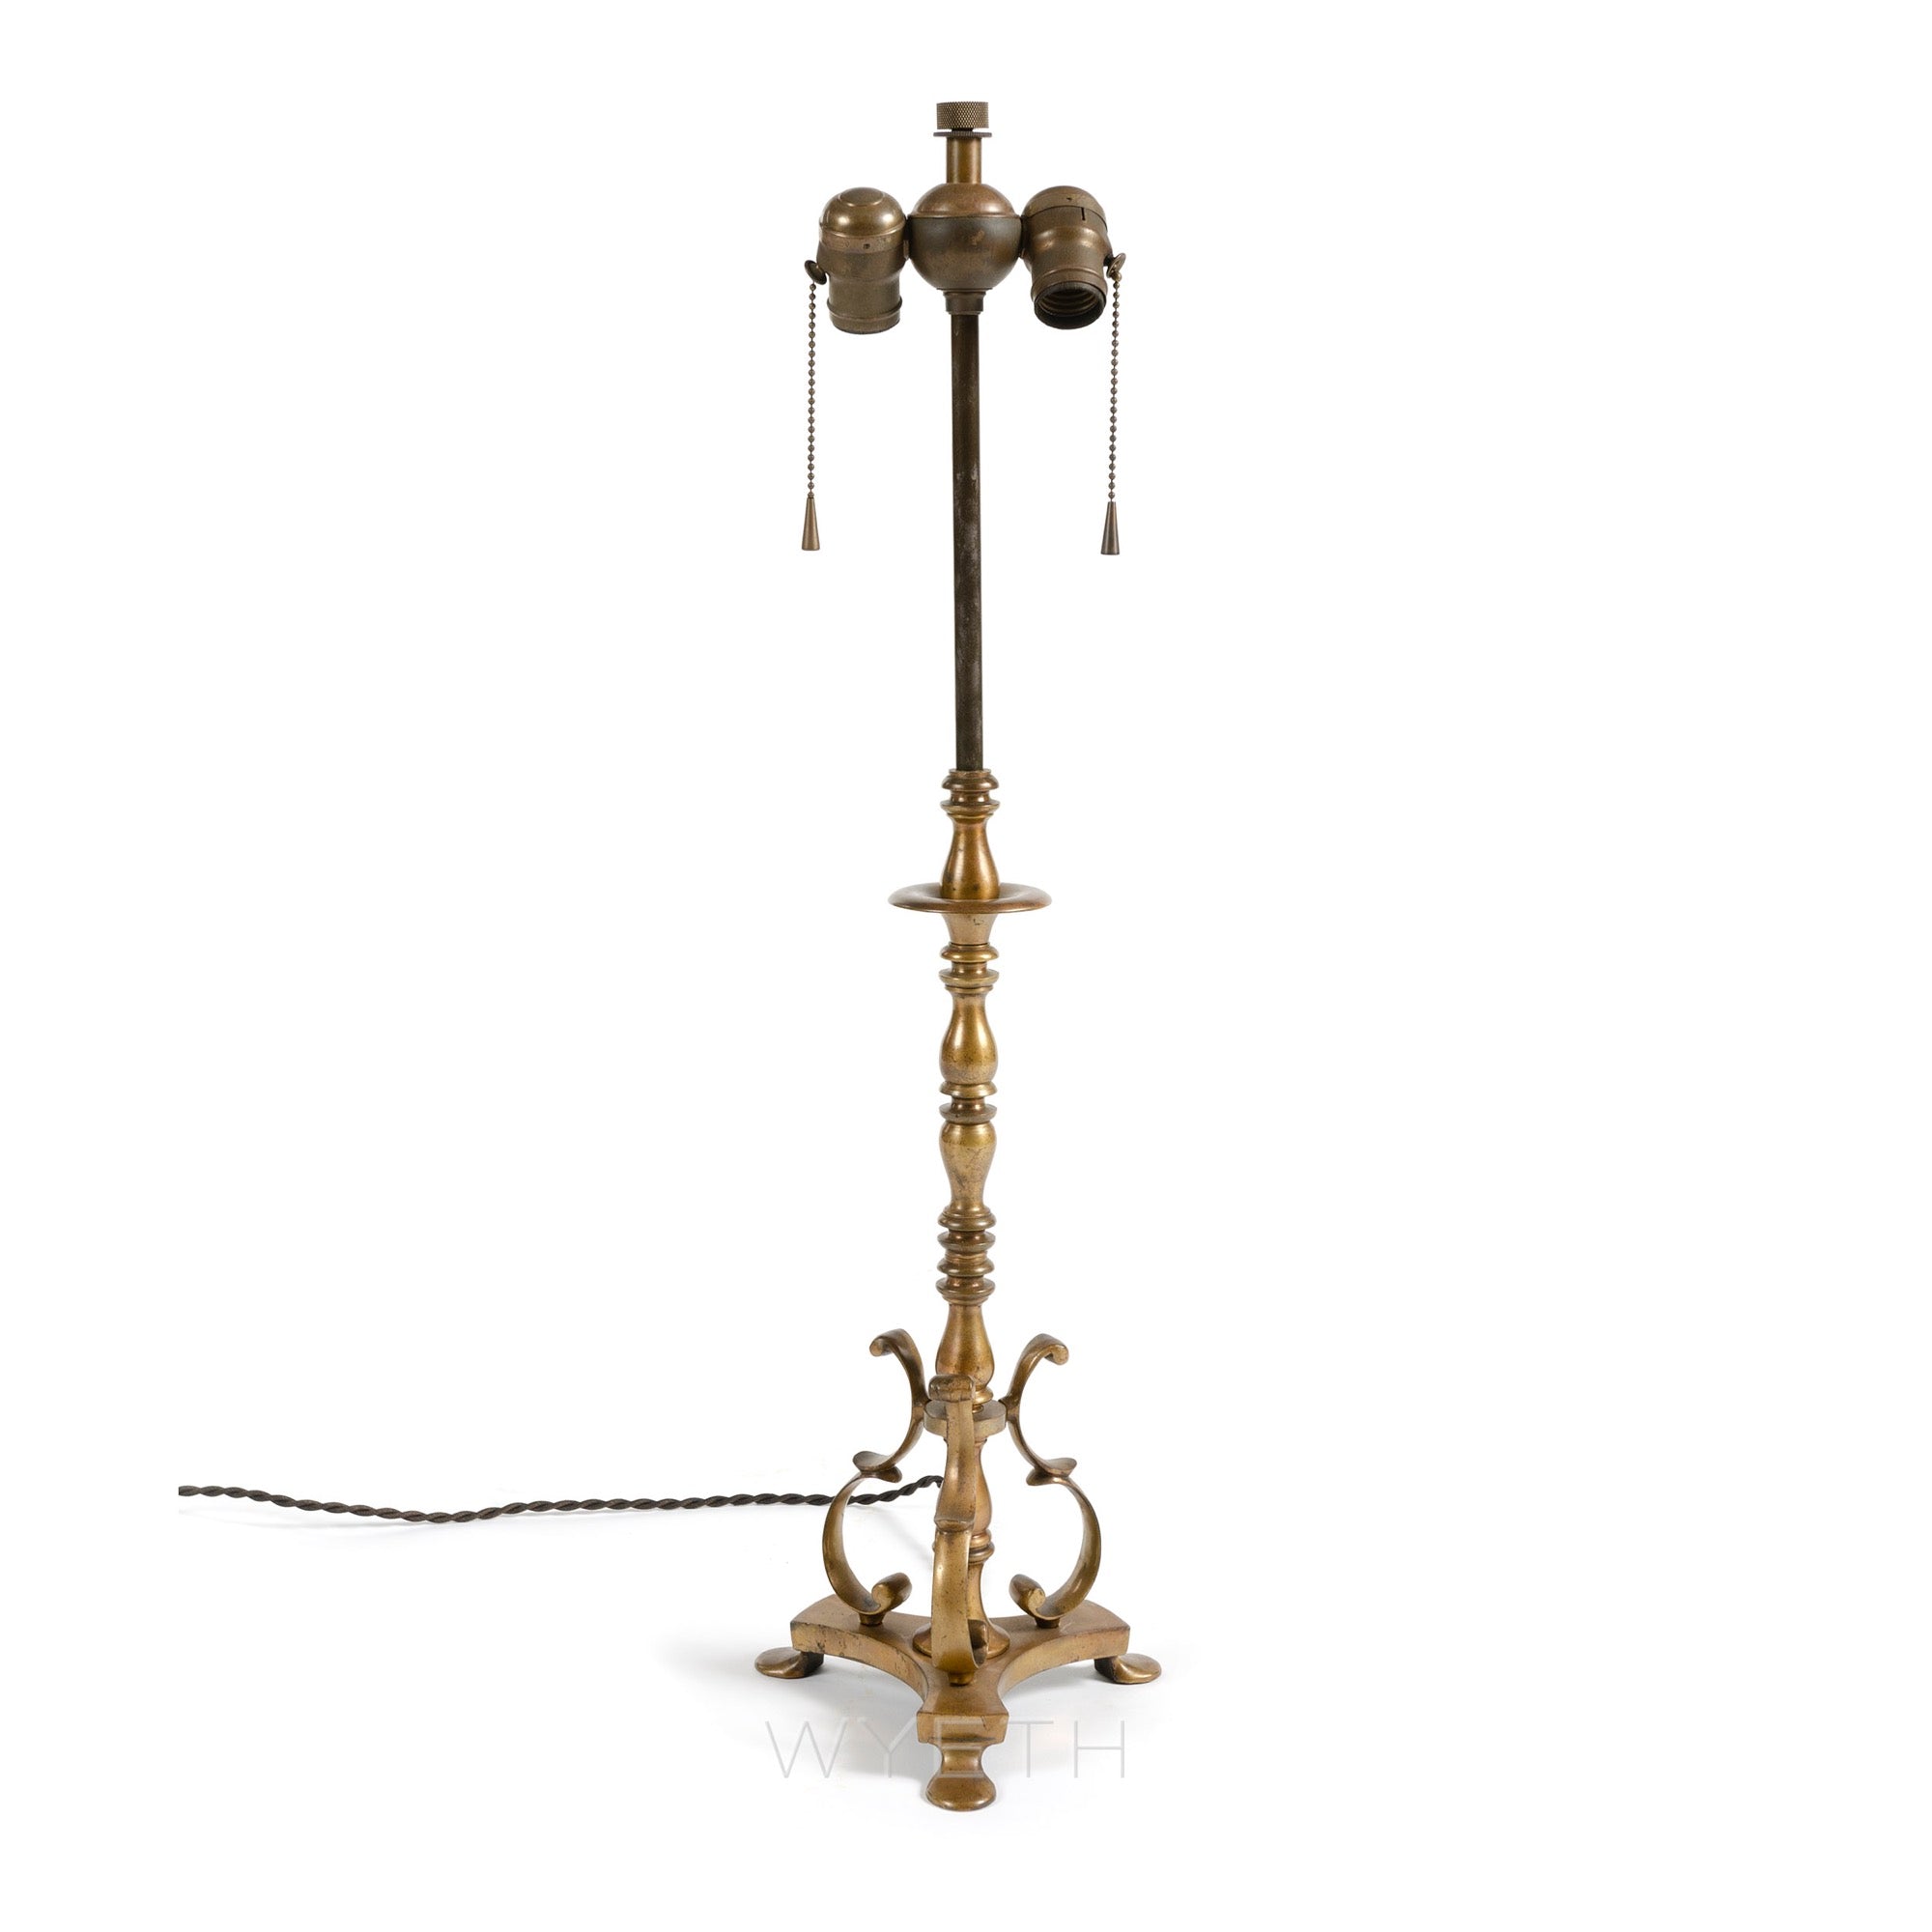 Brass Table Lamp from USA